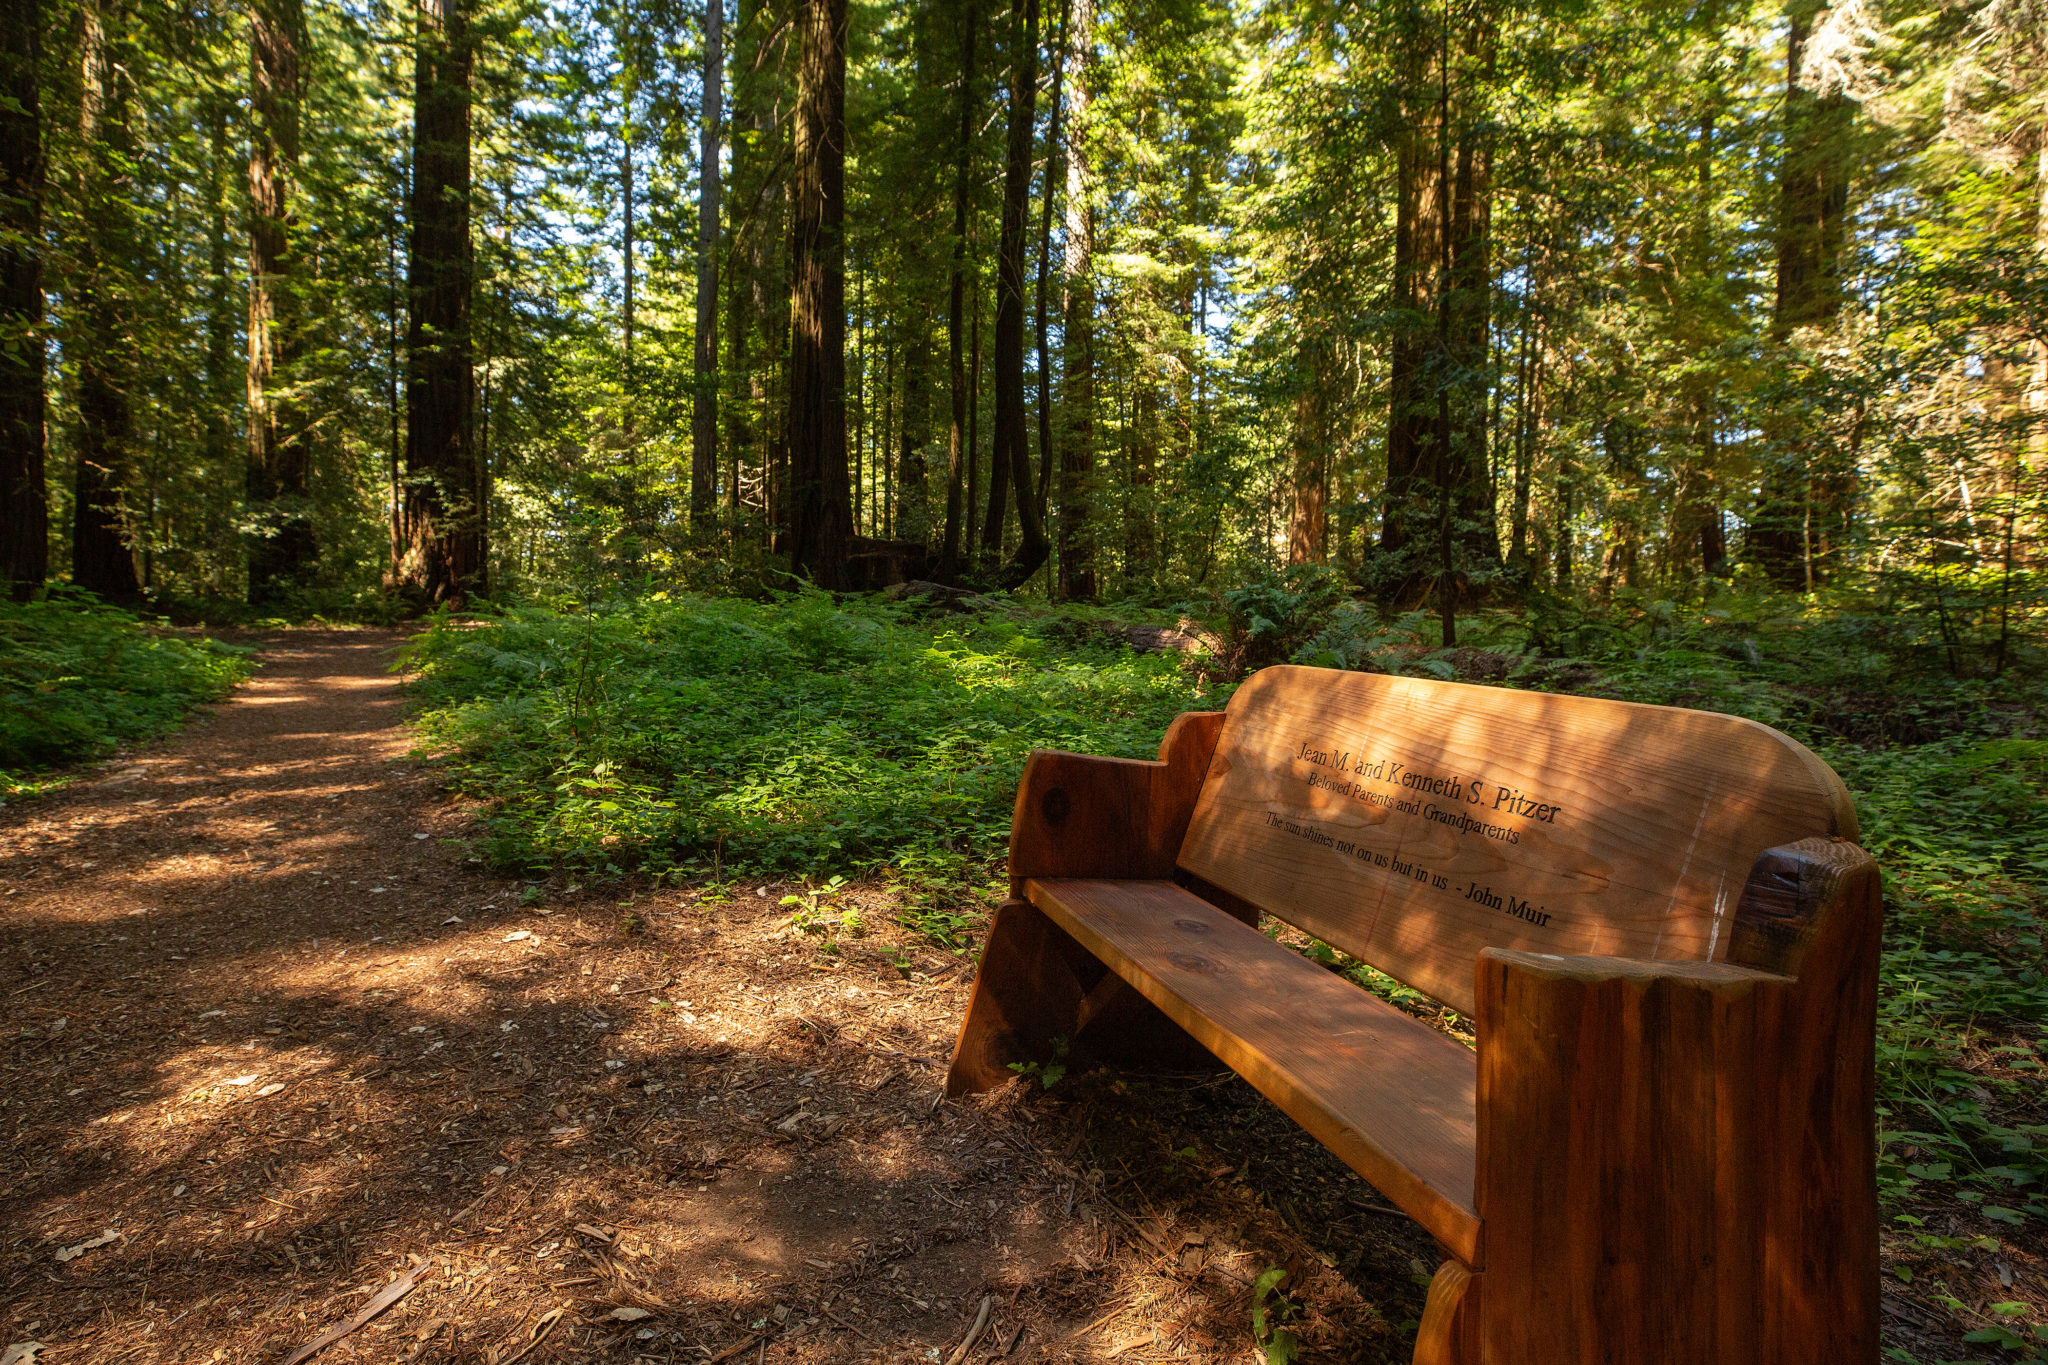 An inviting trailside bench allows visitors to take a rest in the Grove of Old Trees, an old-growth redwood grove near Occidental. (Alvin Jornada/The Press Democrat)